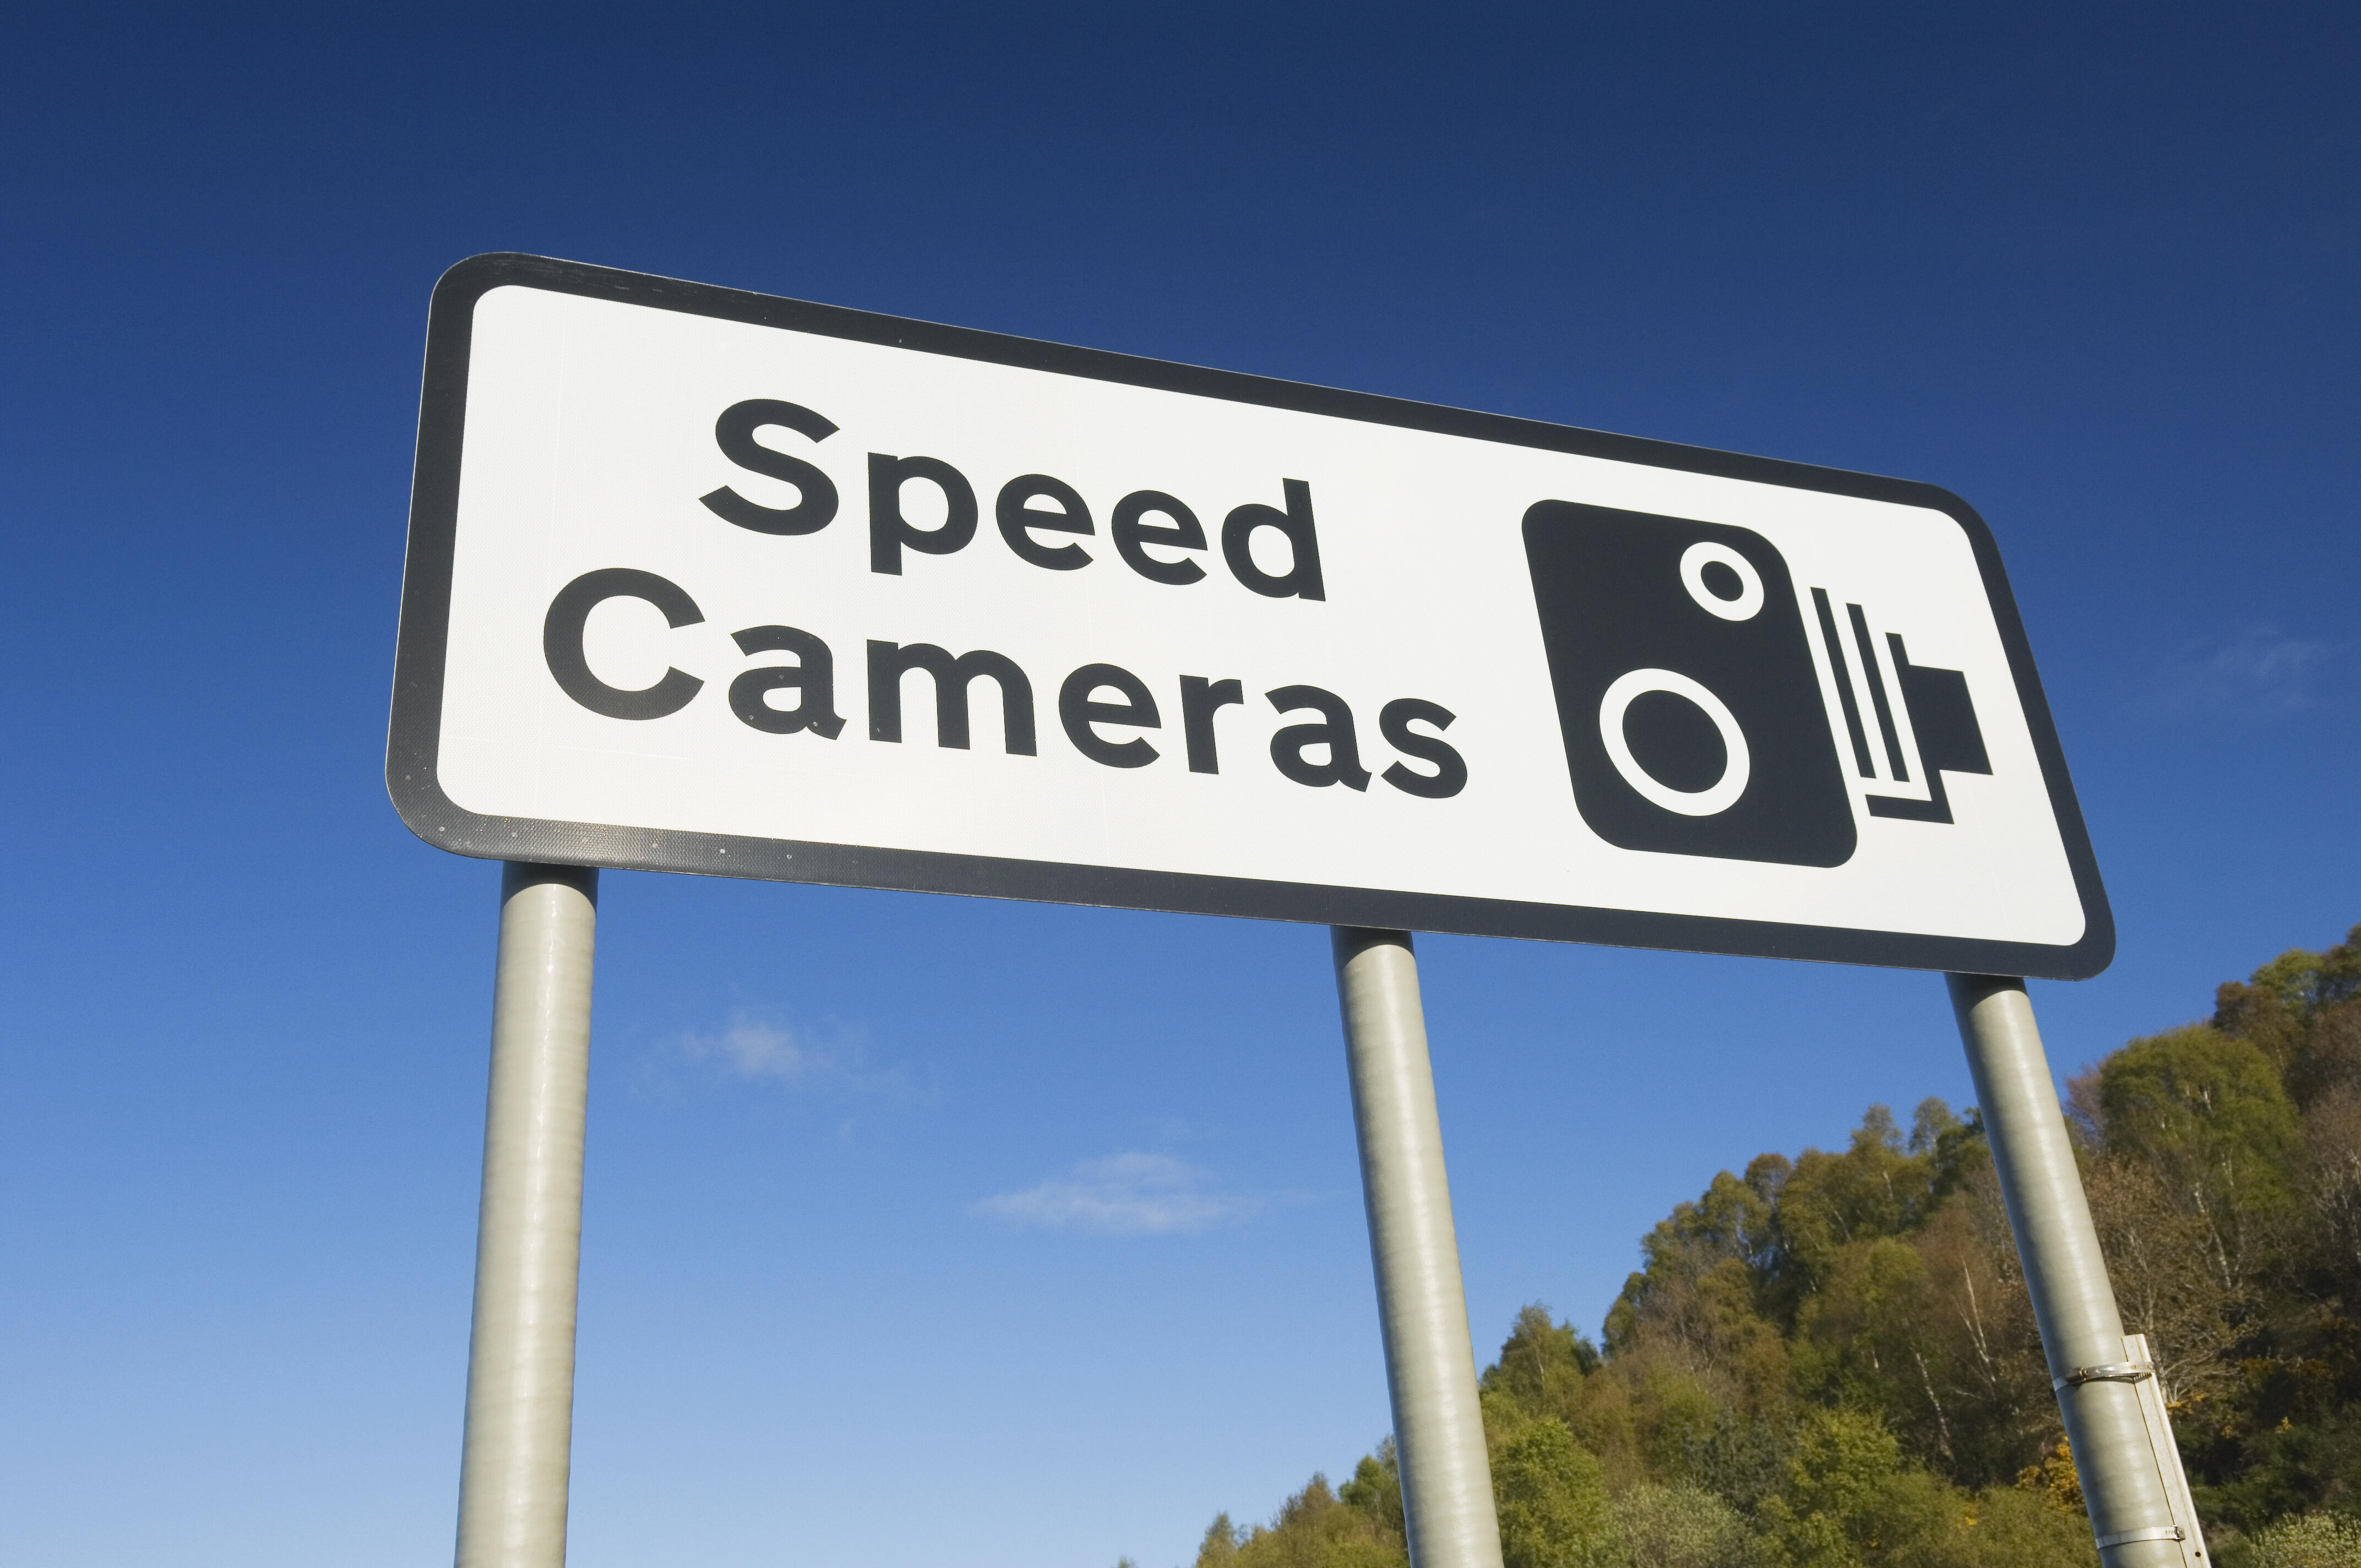 Speed cameras sign against a clear blue sky.